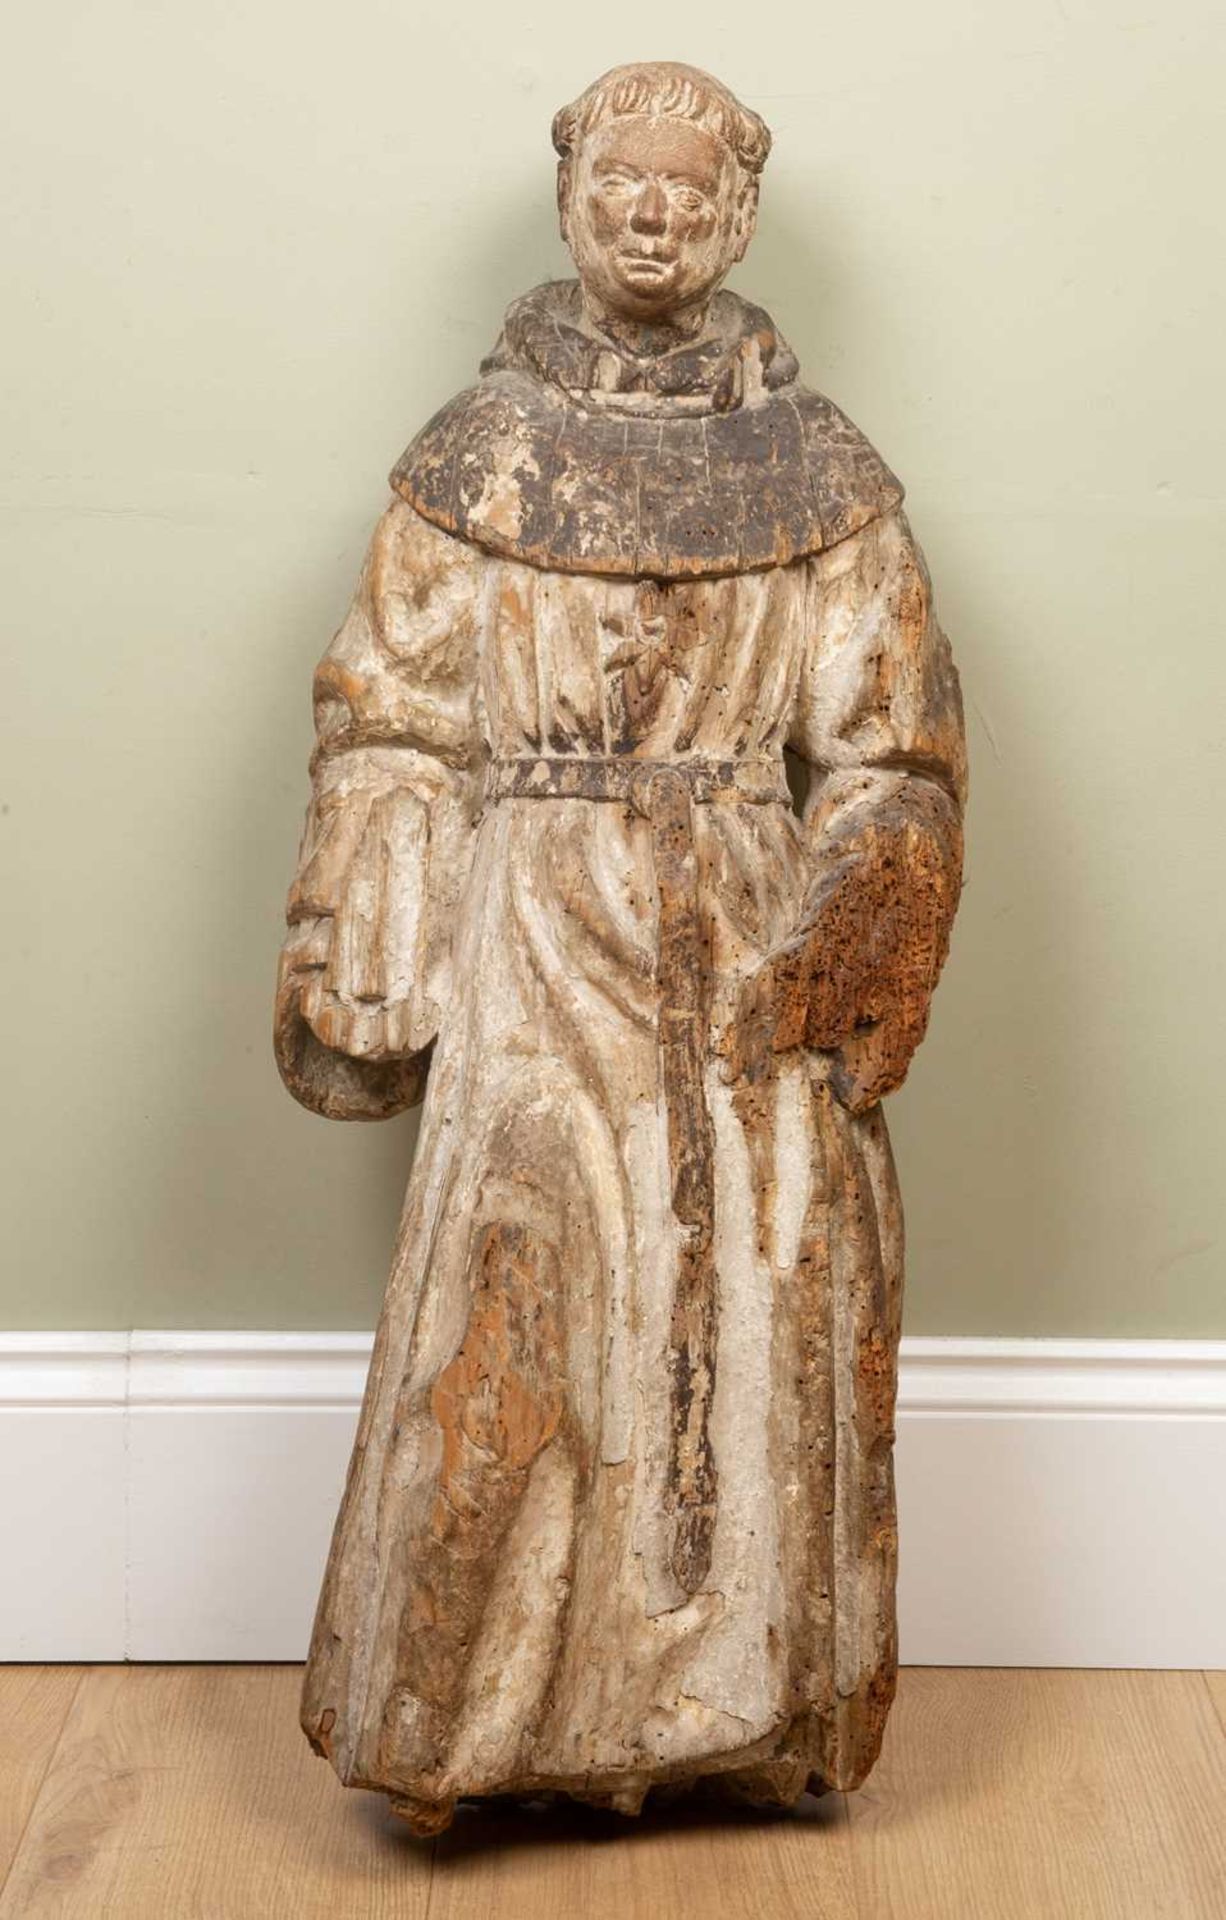 An antique, possibly 17th century, continental carved pine sculpture depicting a monk dressed in his